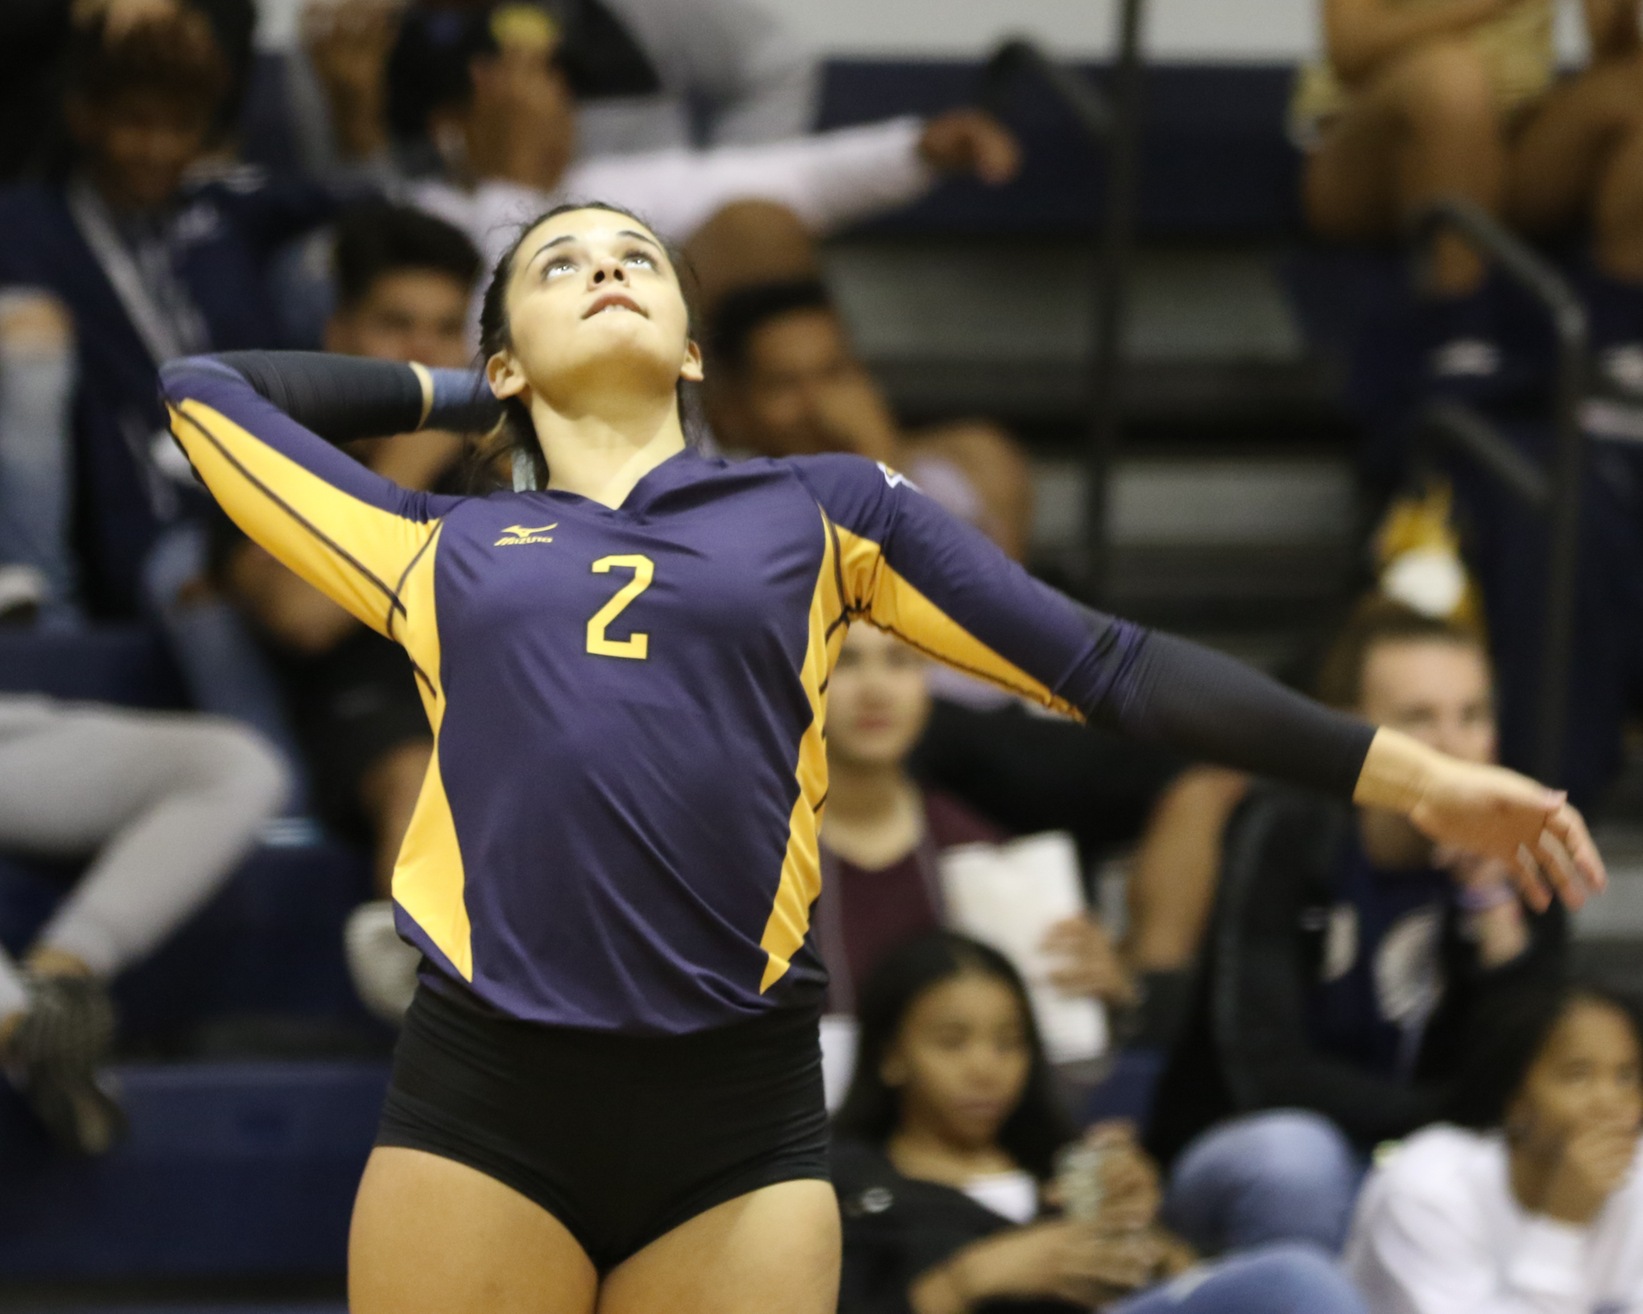 WNCC sweeps Trinidad, moves 1/2 game in first place in conference standings